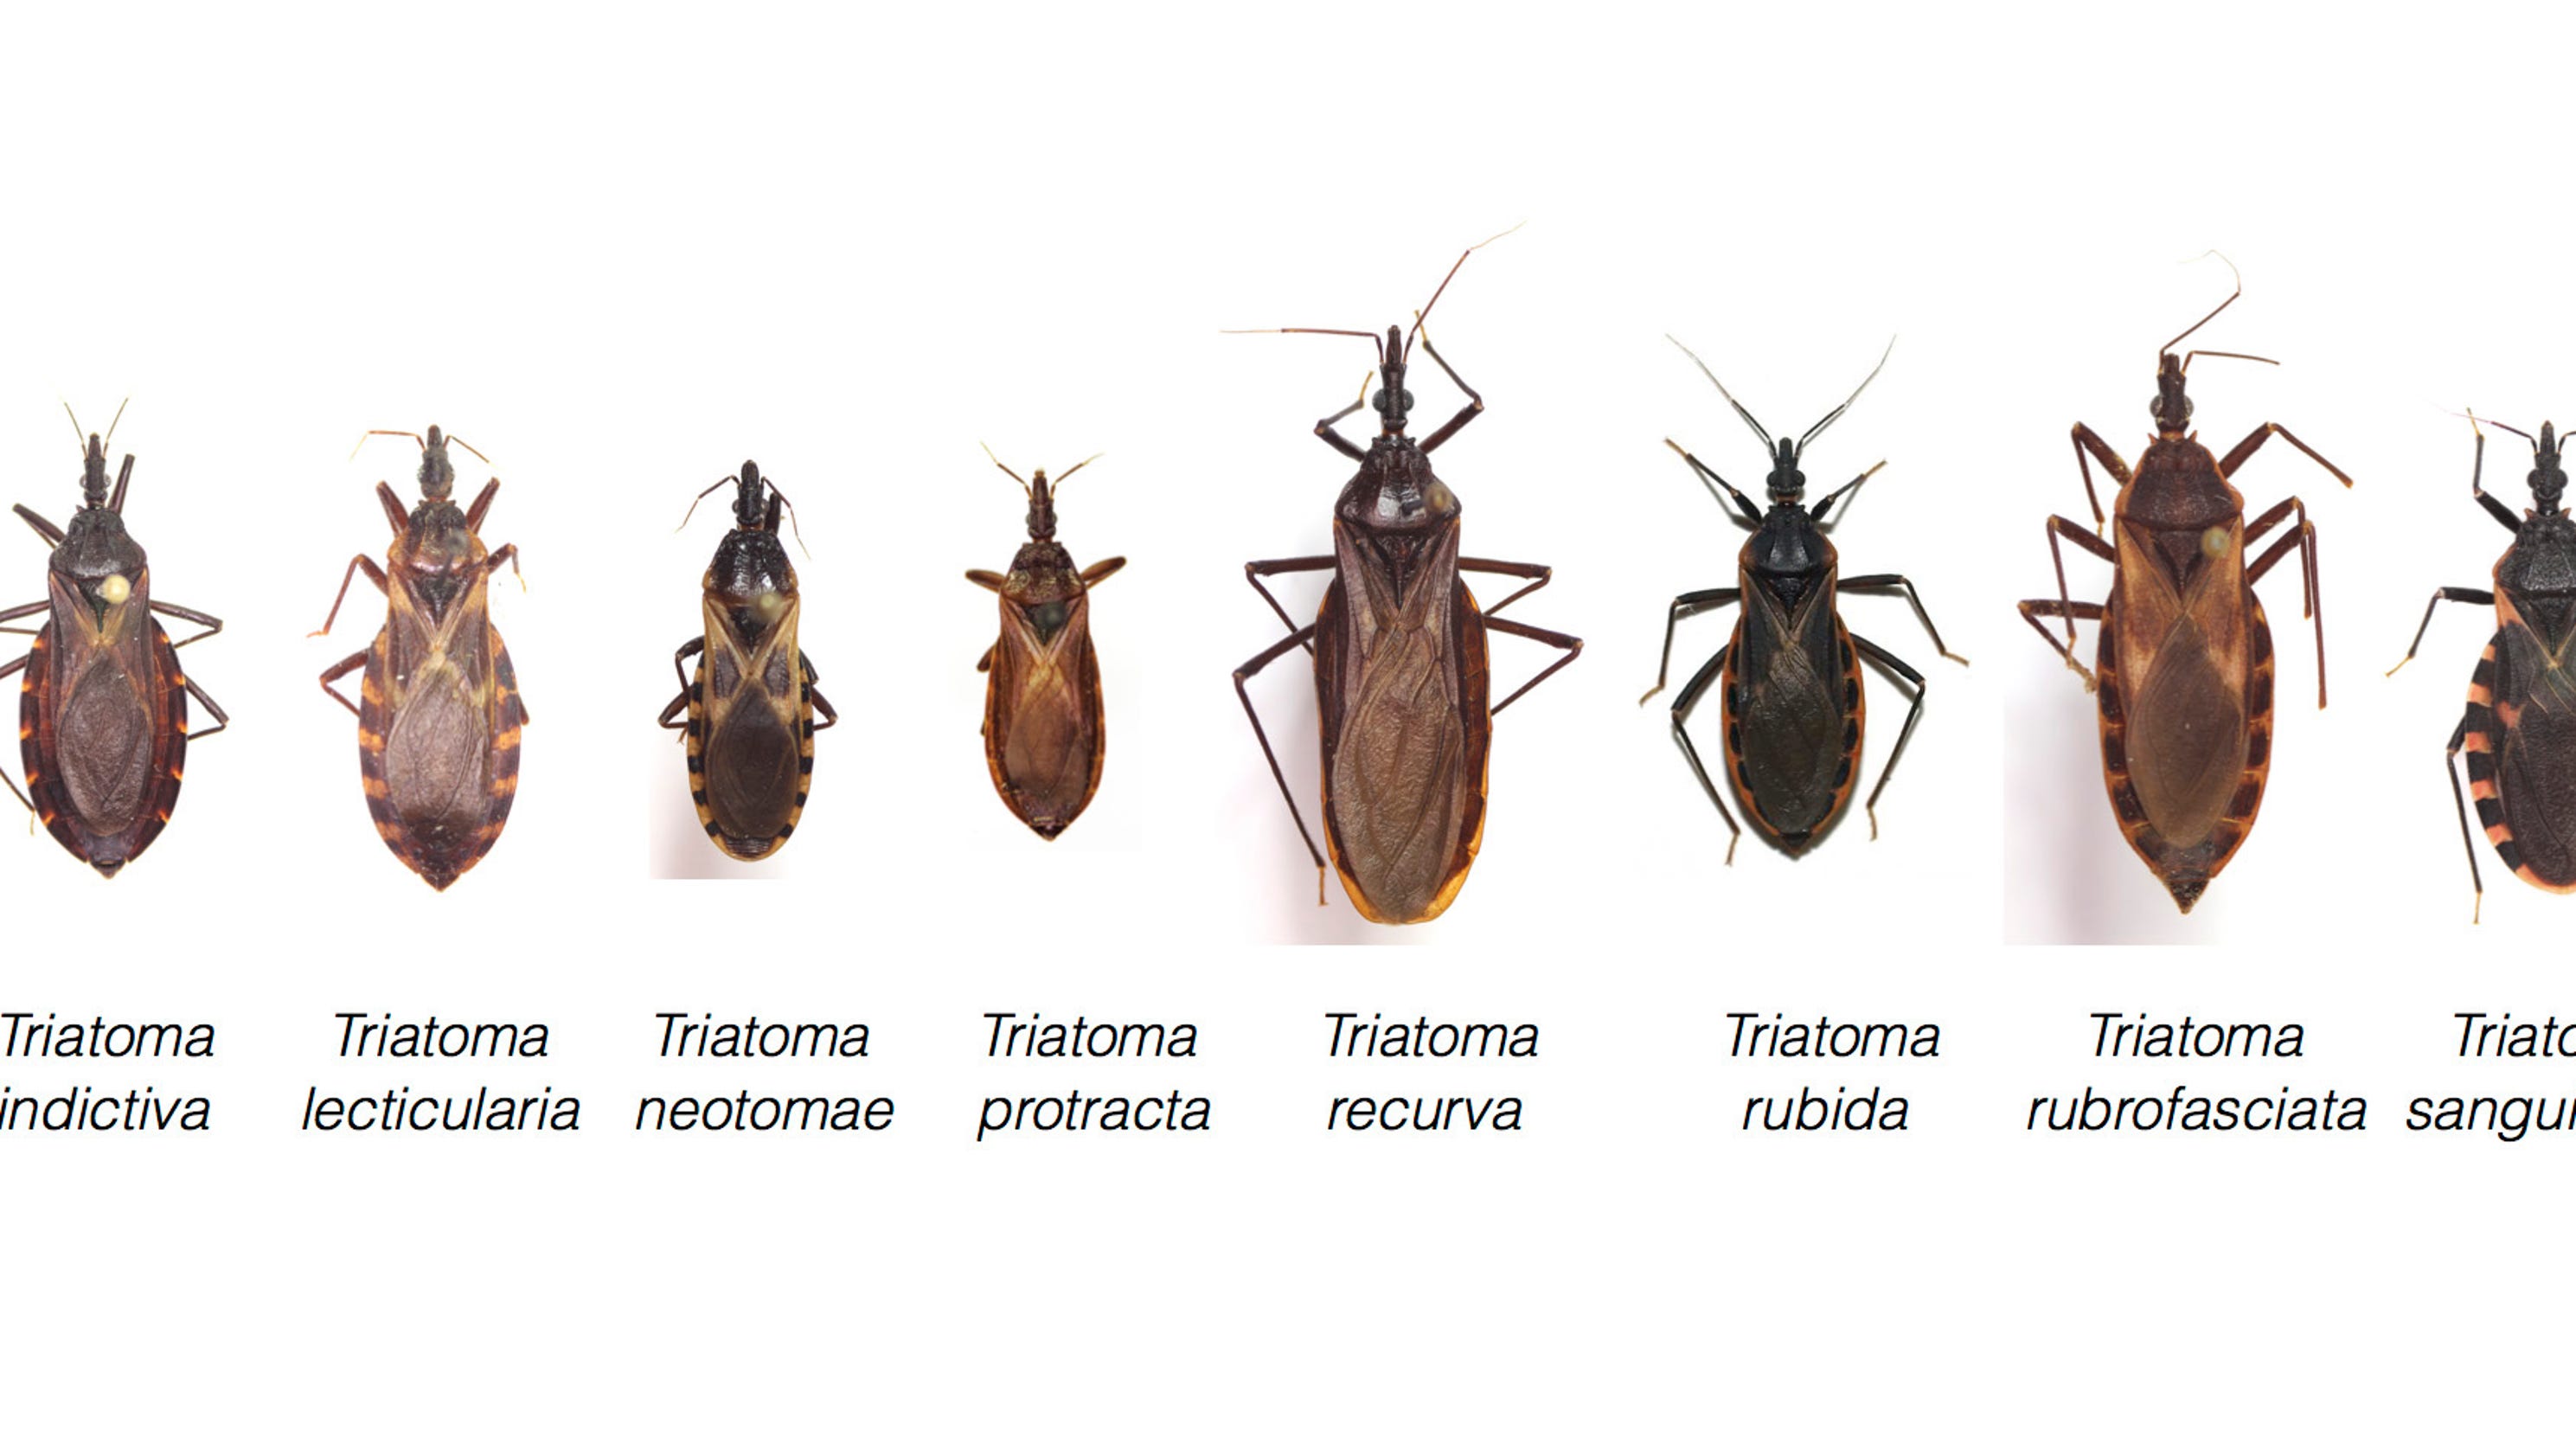 texas-has-11-types-of-kissing-bugs-and-all-carry-deadly-chagas-disease